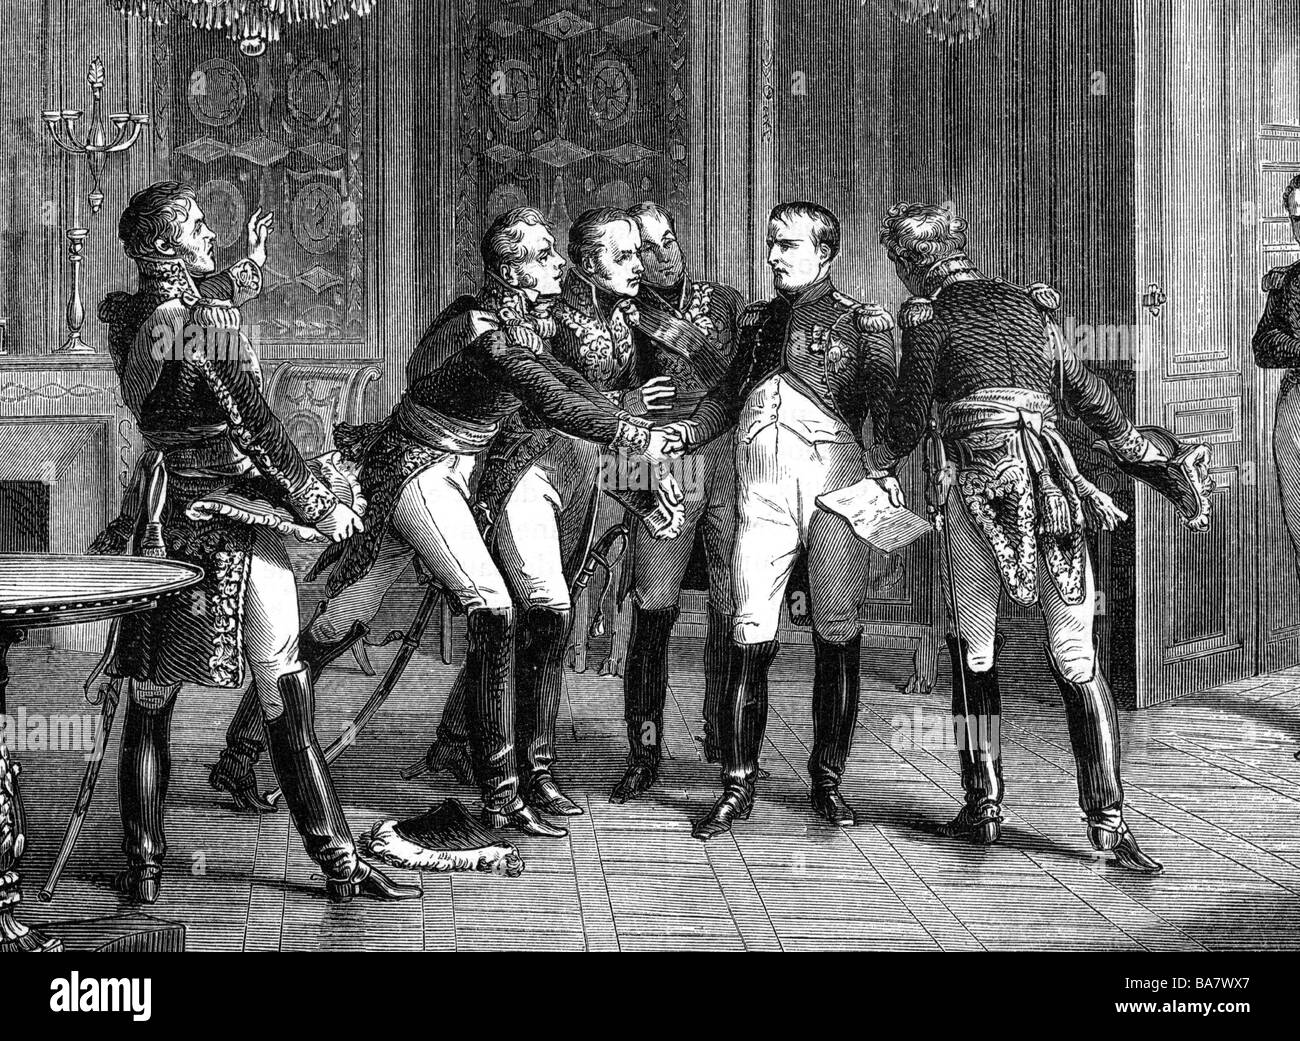 Napoleon I., 15.8.1769 - 5.5. 1821, Emperor of the French 2.12.1804 - 22.6.1815, abdication at Fontainebleau 11.4.1814, telling his generals, wood engraving, 19th century, , Stock Photo